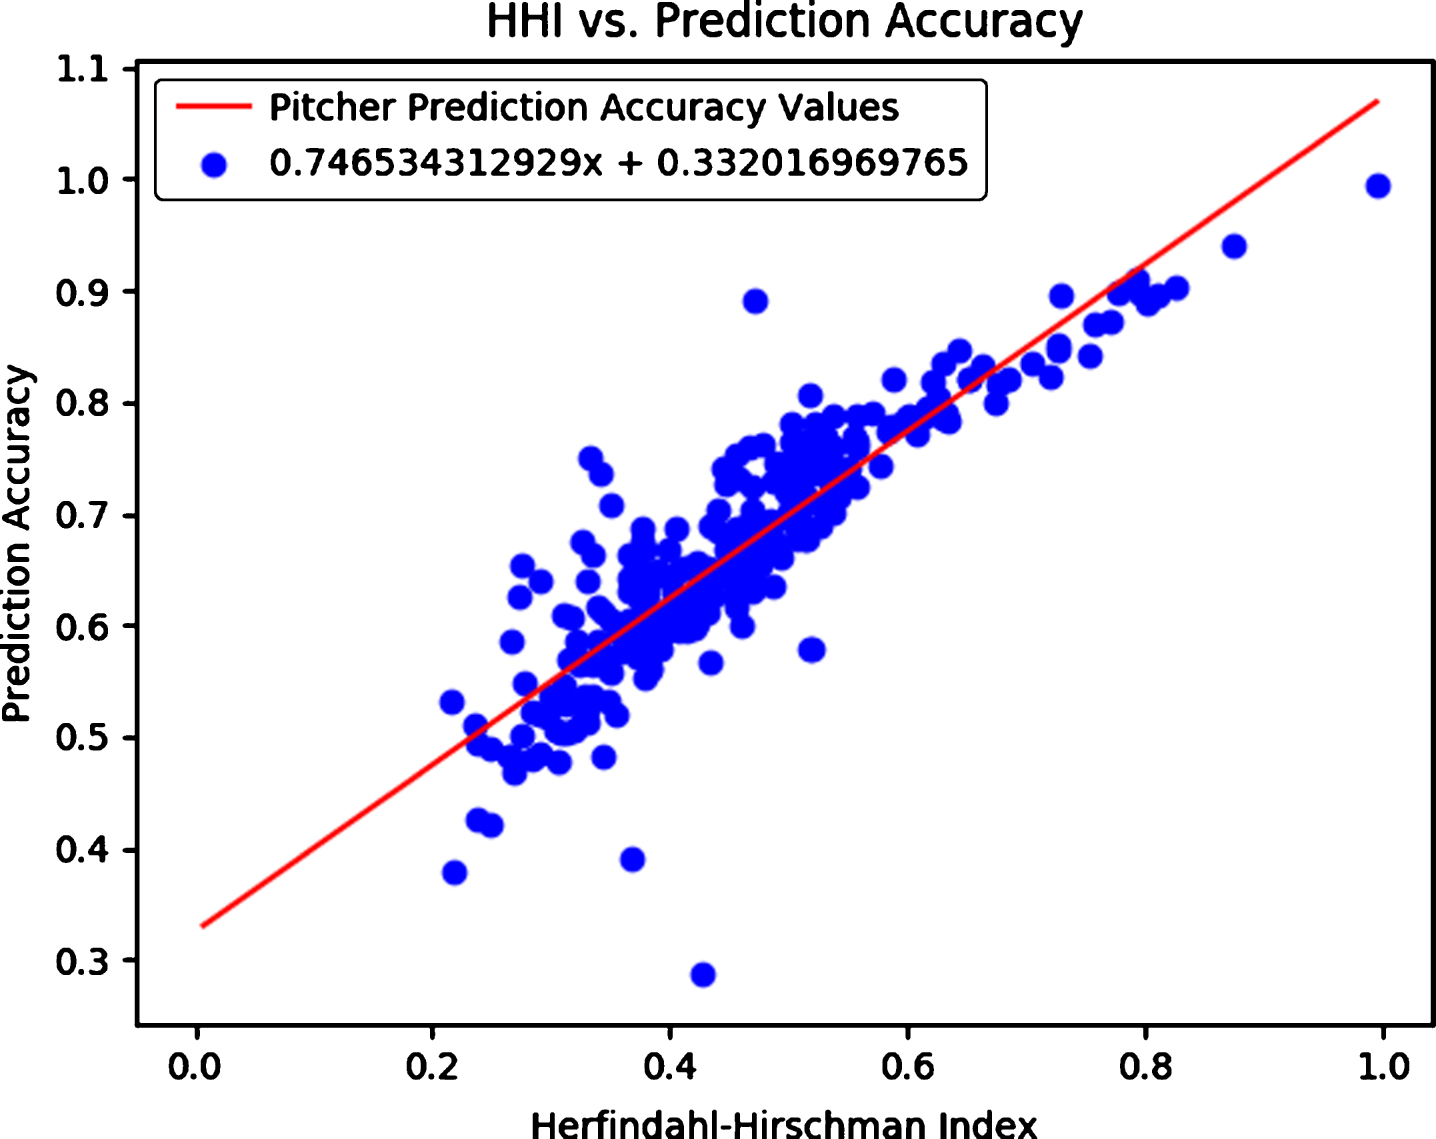 Linear regression fit line between the Herfindahl-Hirschman Index and the random forest model prediction accuracy, with intercept 0.332 and correlation 0.746.